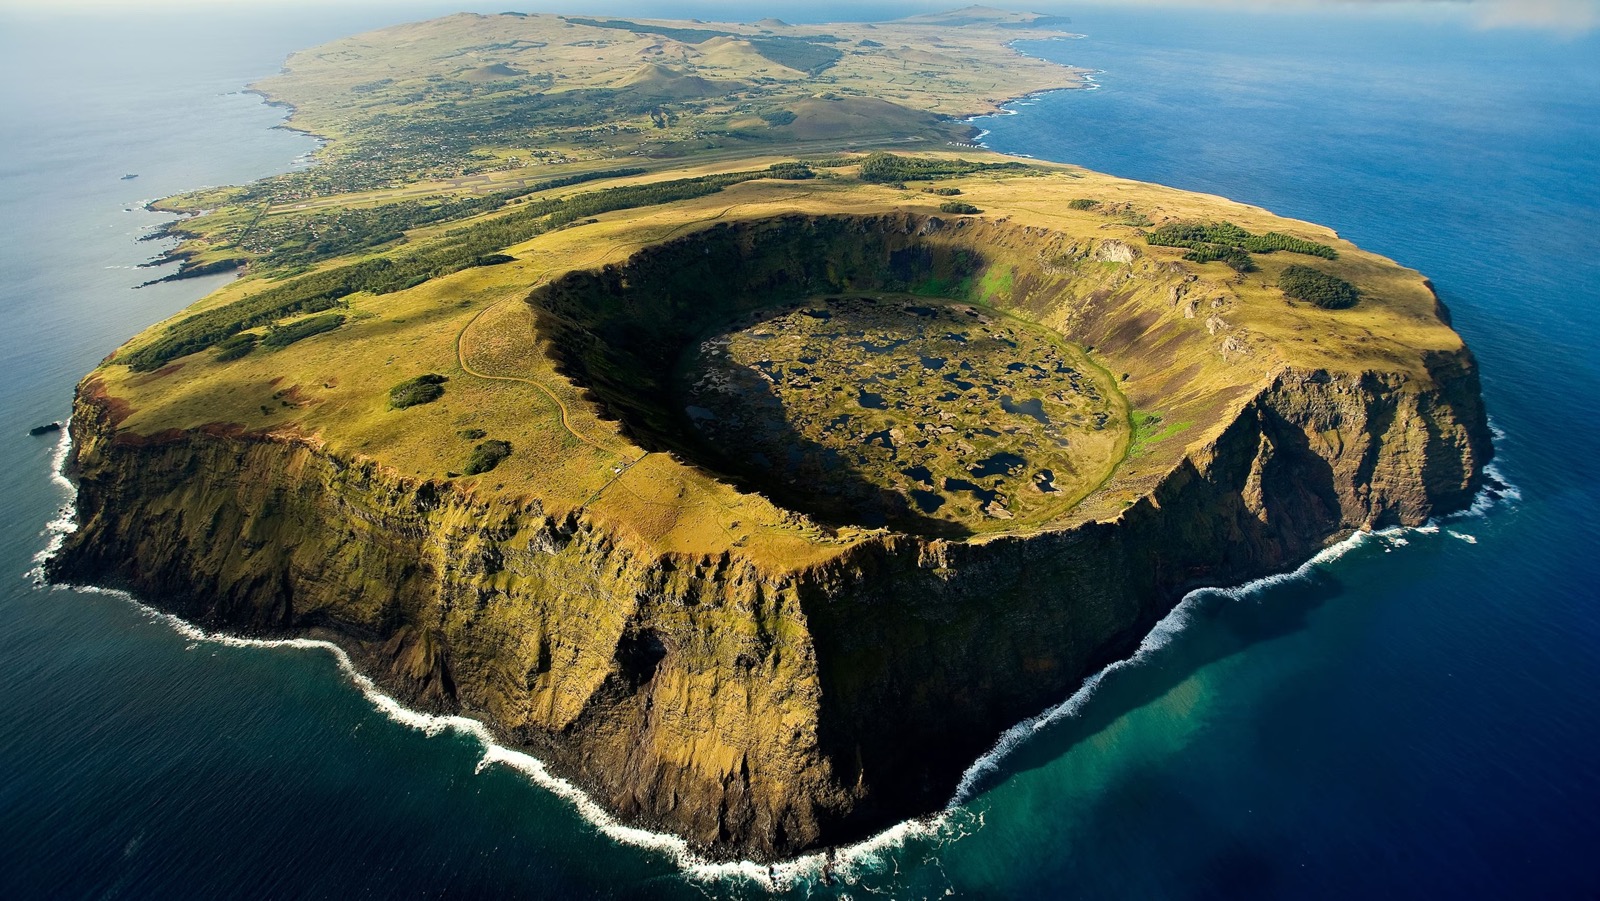 Can You Match These Extraordinary Natural Features to Their Respective Countries? Rano Kau, Easter Island